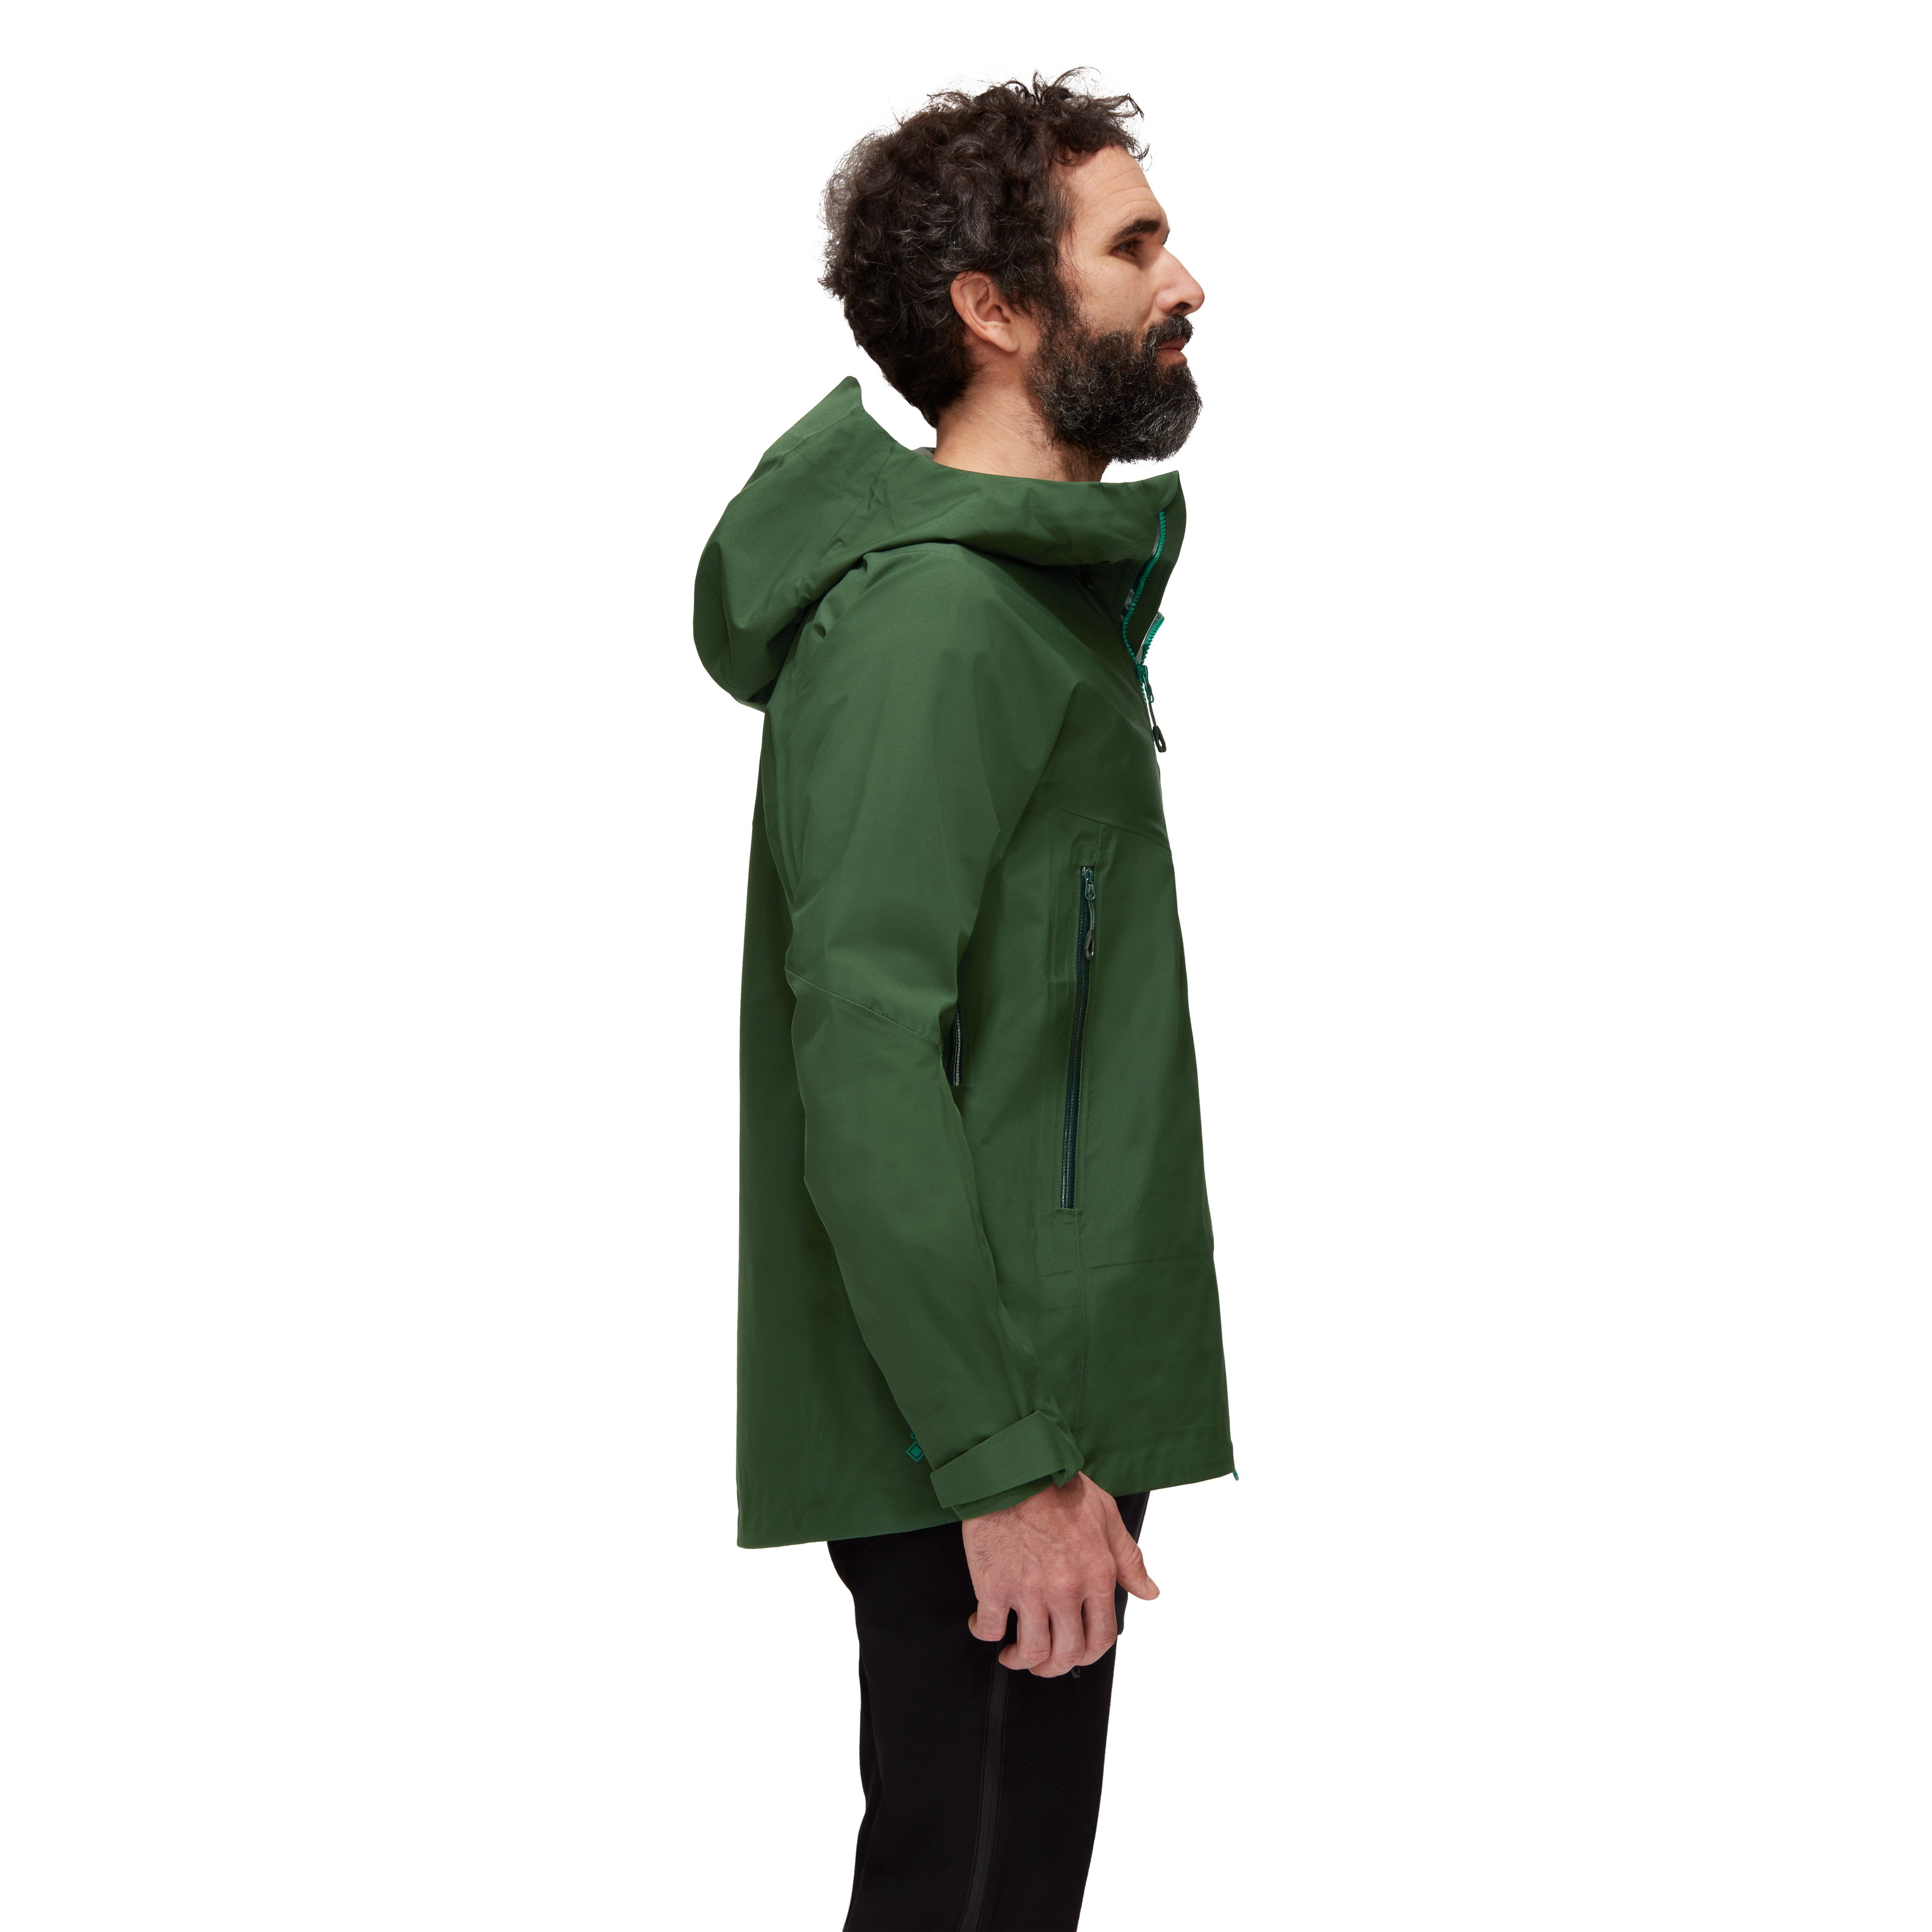 Crater HS Hooded Jacket Men product image